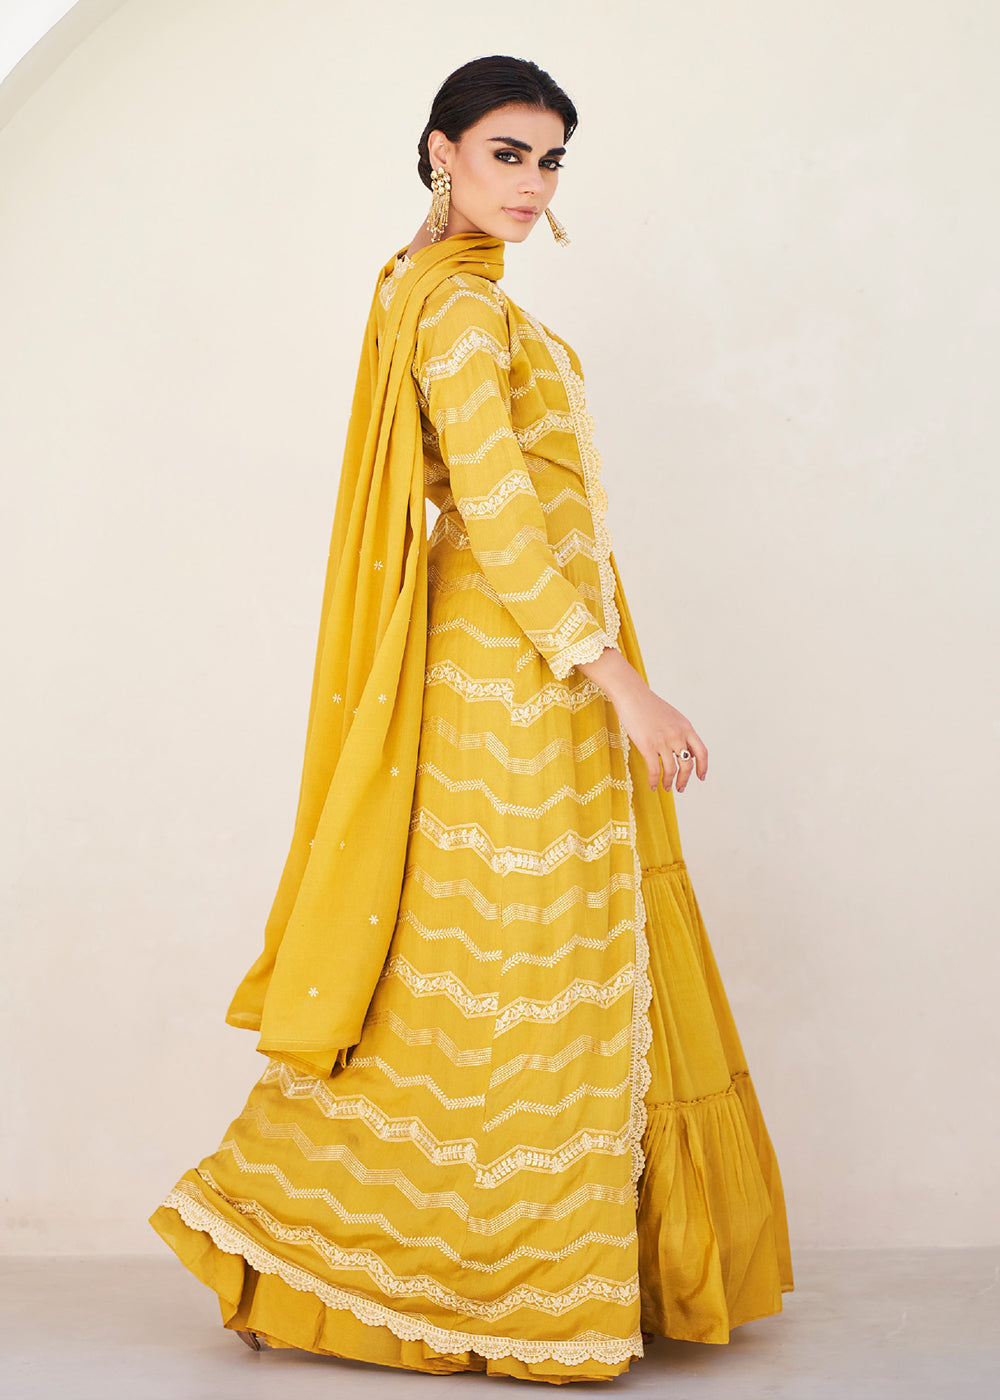 Buy Now Pretty Yellow Koti Style Wedding Party Anarkali Gown Online in USA, UK, Australia, Canada & Worldwide at Empress Clothing. 